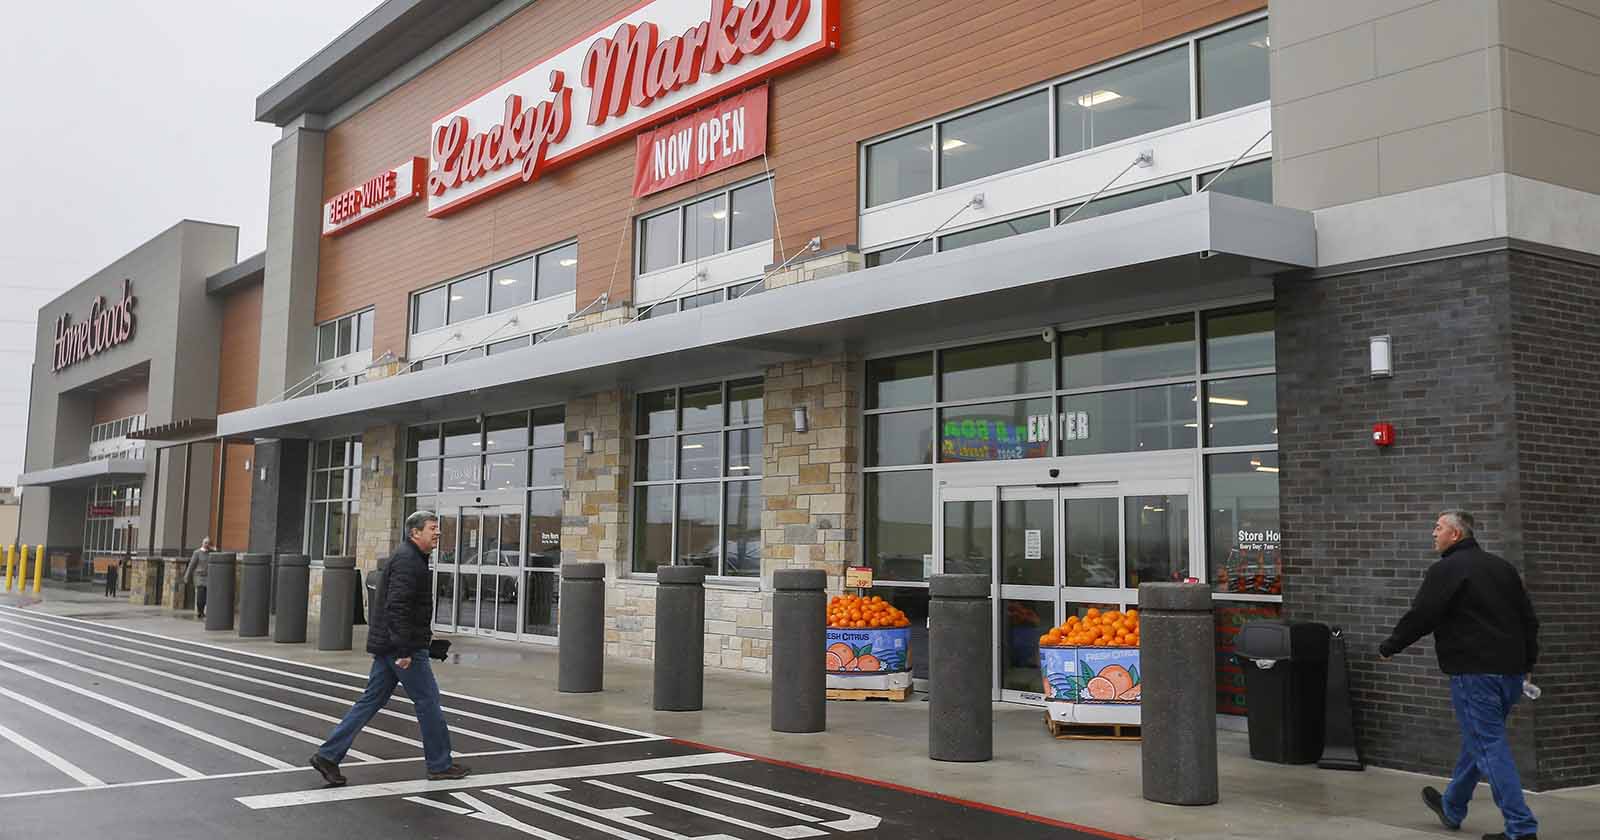 Lucky's Supermarkets, Pier 1 Imports, and more are not reopening thanks to the pandemic killing their business. Read the full list of closing businesses.